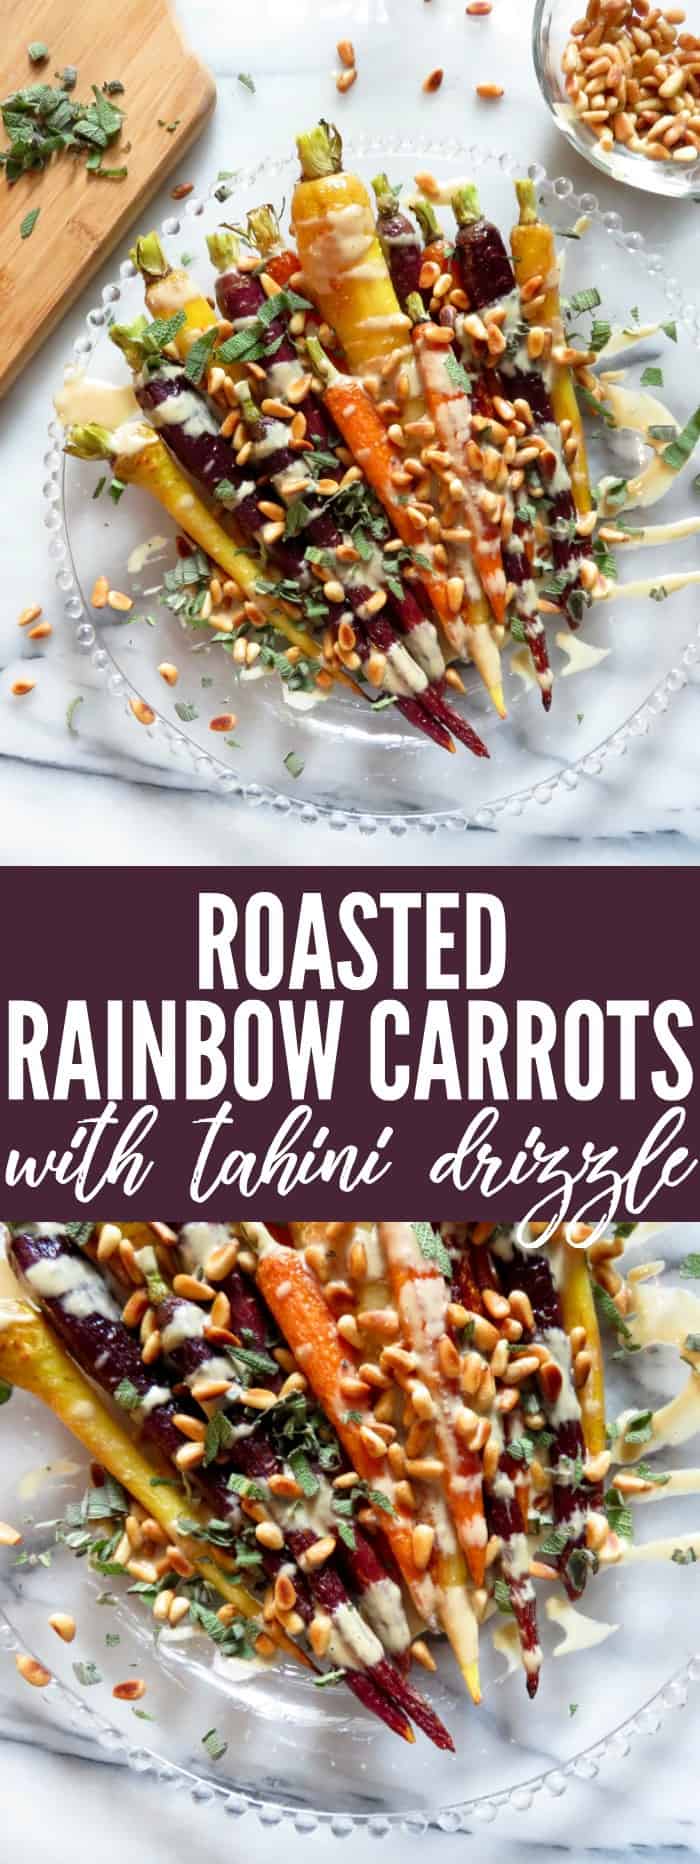 Easy peasy Roasted Rainbow Carrots with Tahini are perfect for your weeknight family dinners! They're so delicious and fun to eat! thetoastedpinenut.com #vegetables #glutenfree #weeknight meal